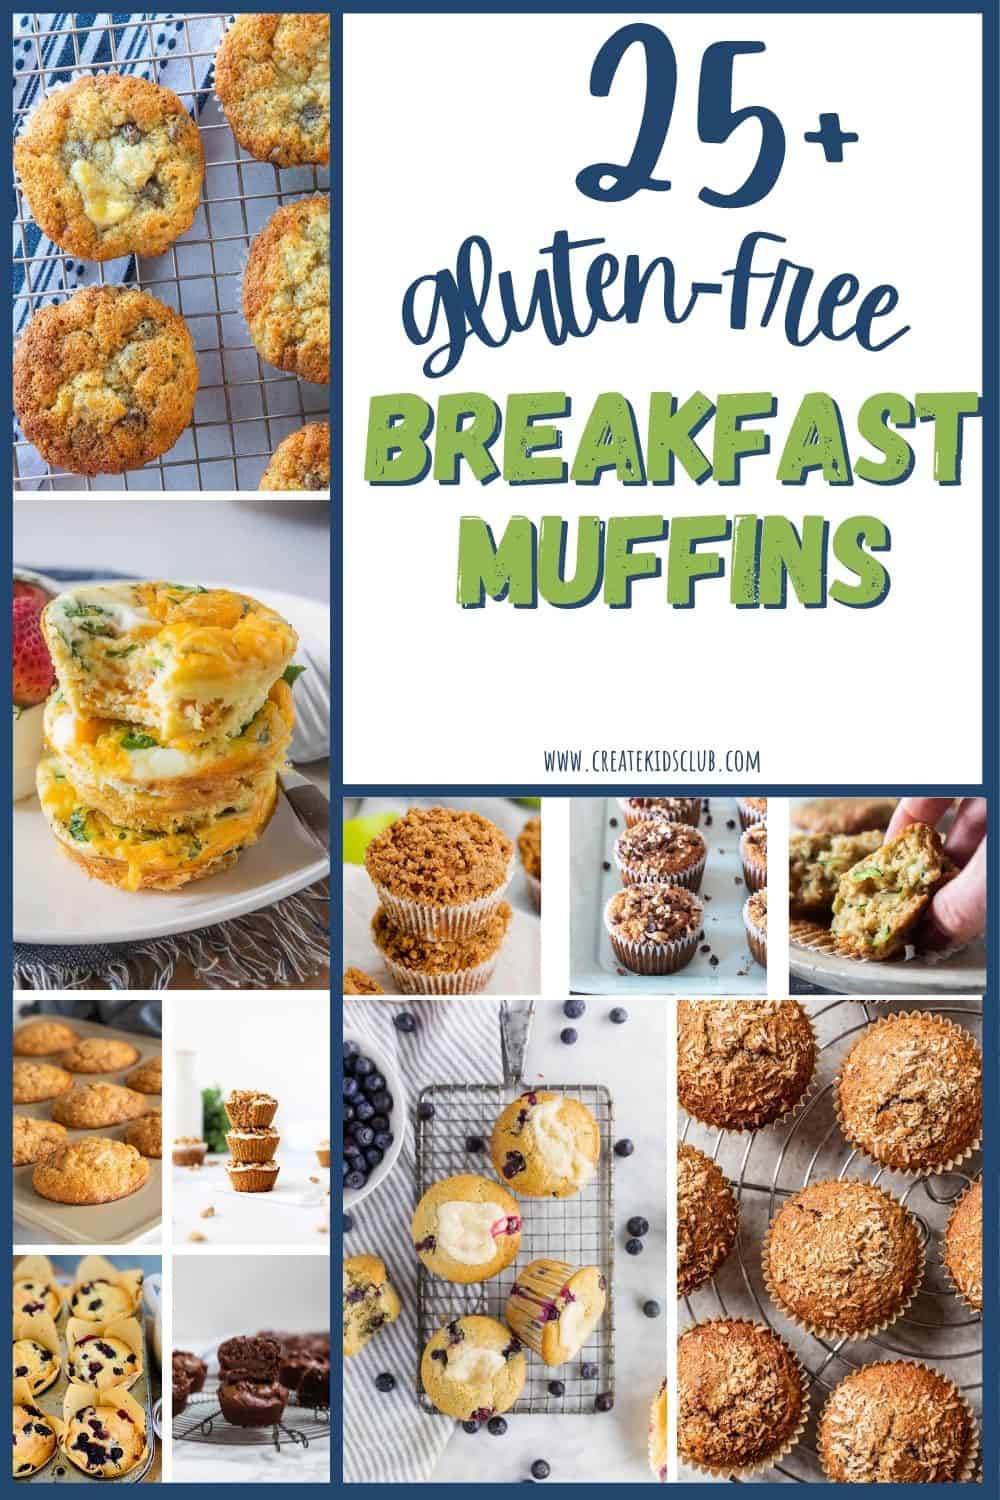 11 pictures of breakfast muffins from blueberry to egg muffins.